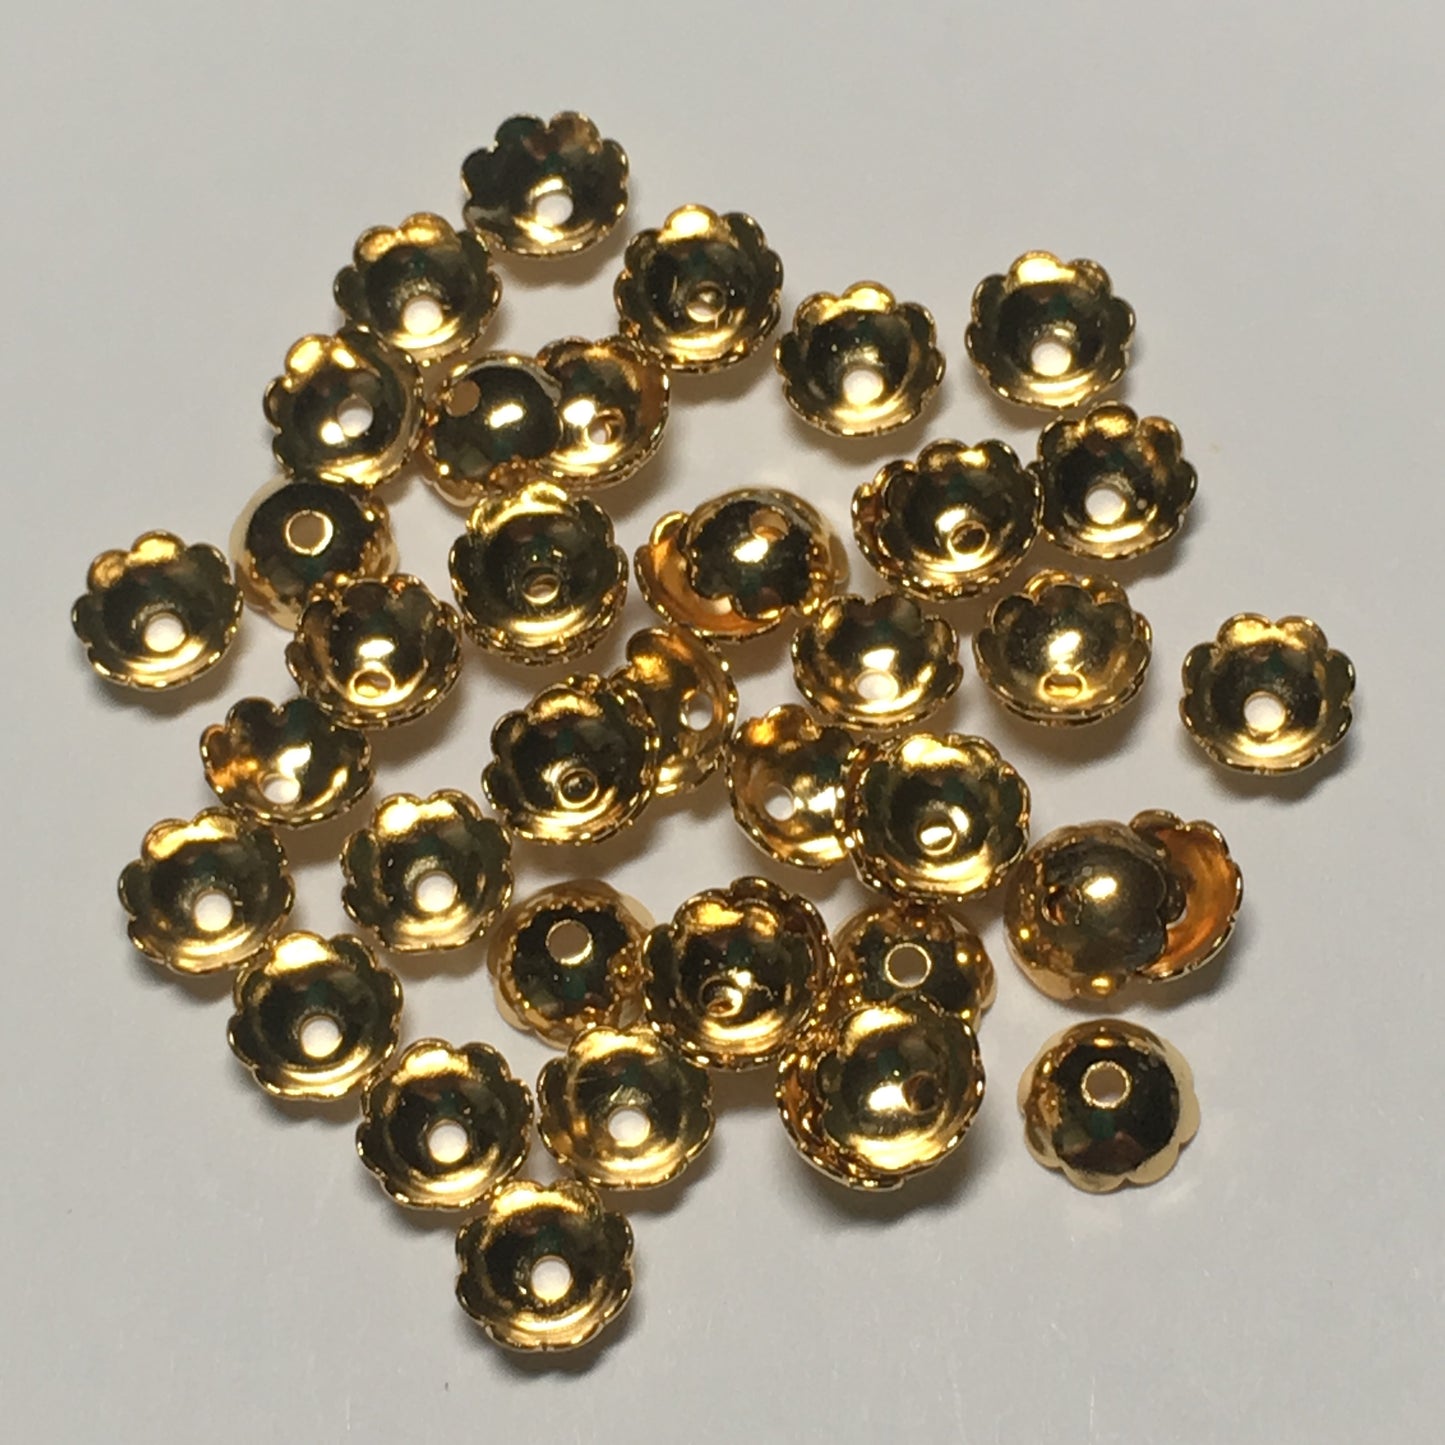 Gold Plated Solid Bead Caps, 6 mm  - 6 or 20 Caps